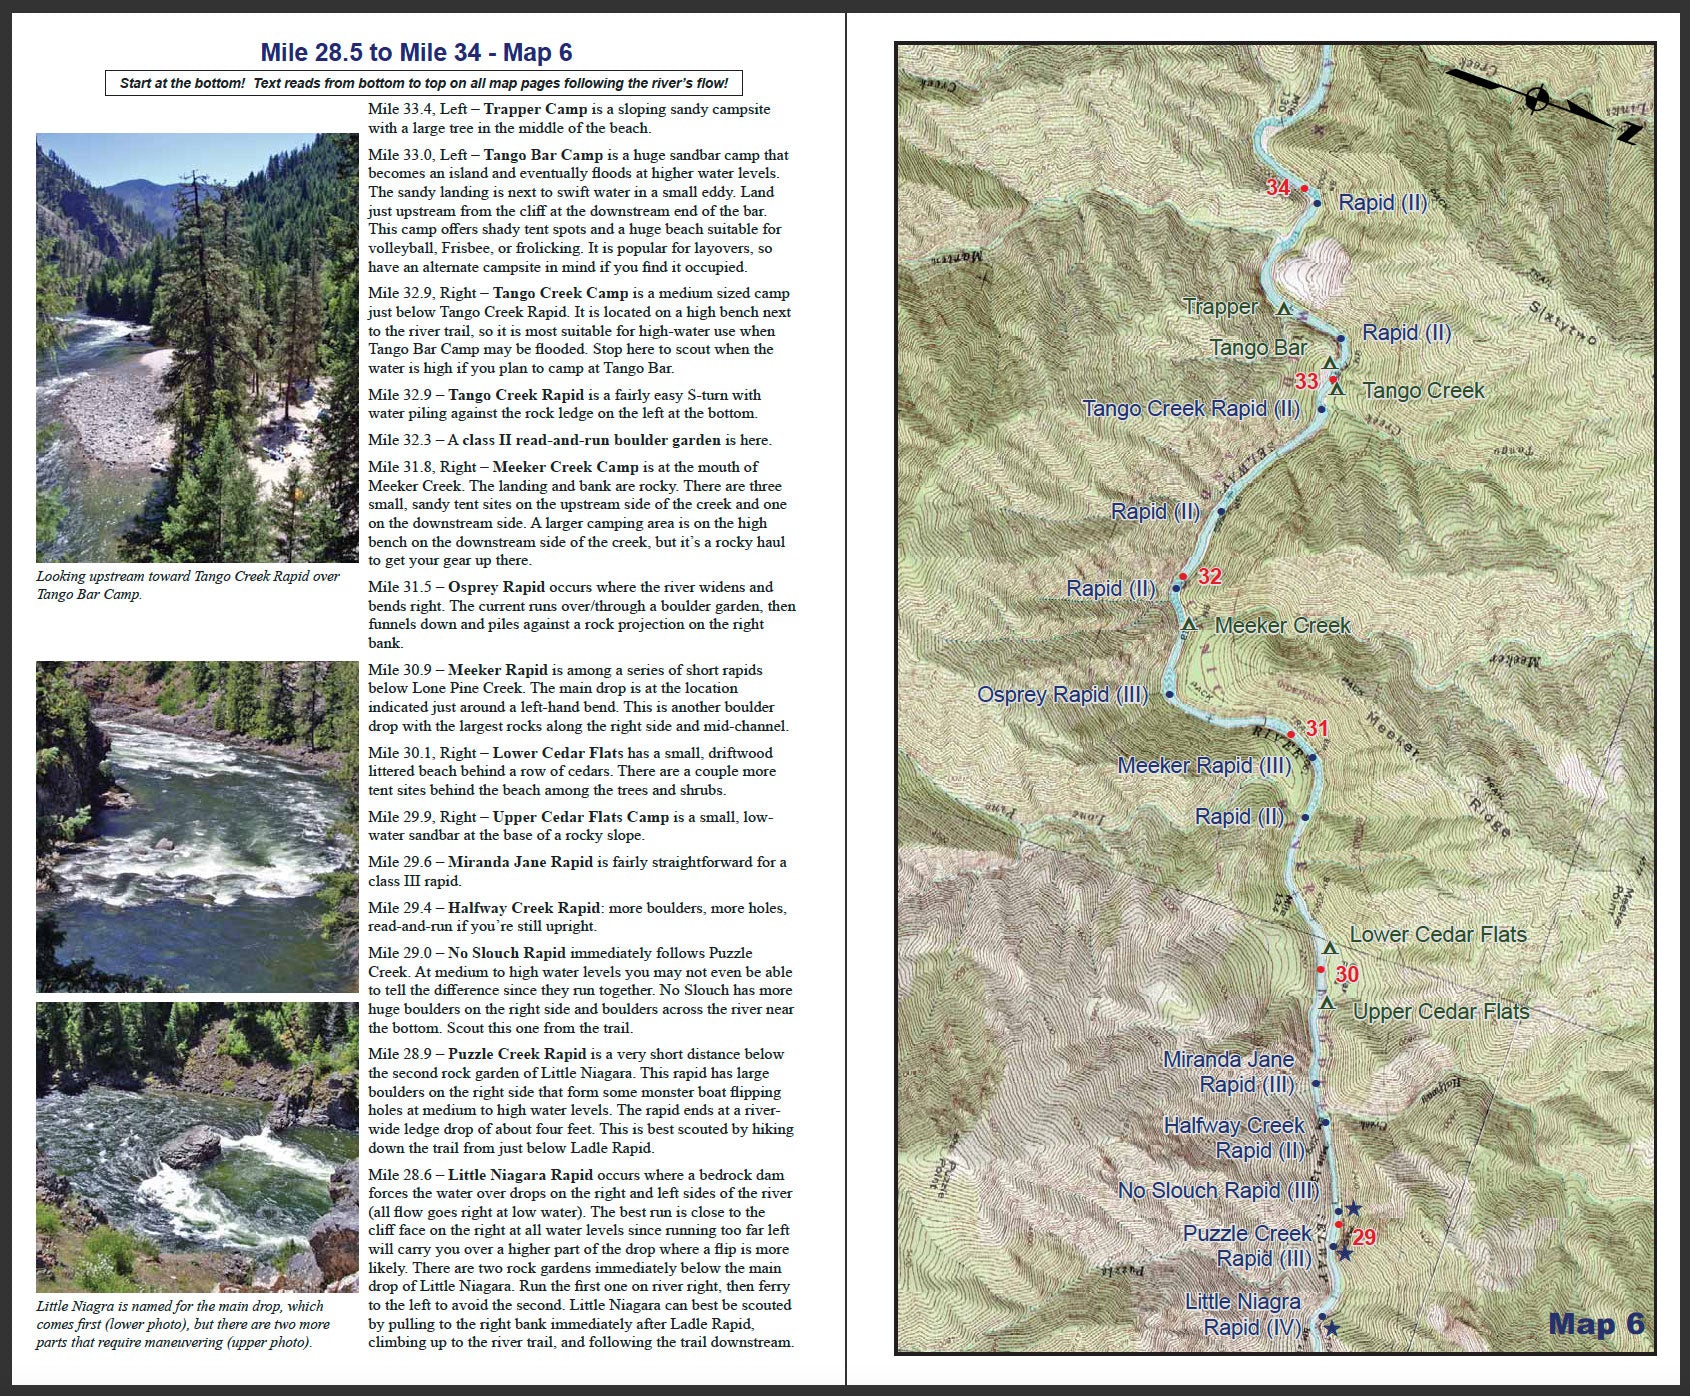 Two Rivermaps guide books featuring detailed maps of the Selway River in Idaho.